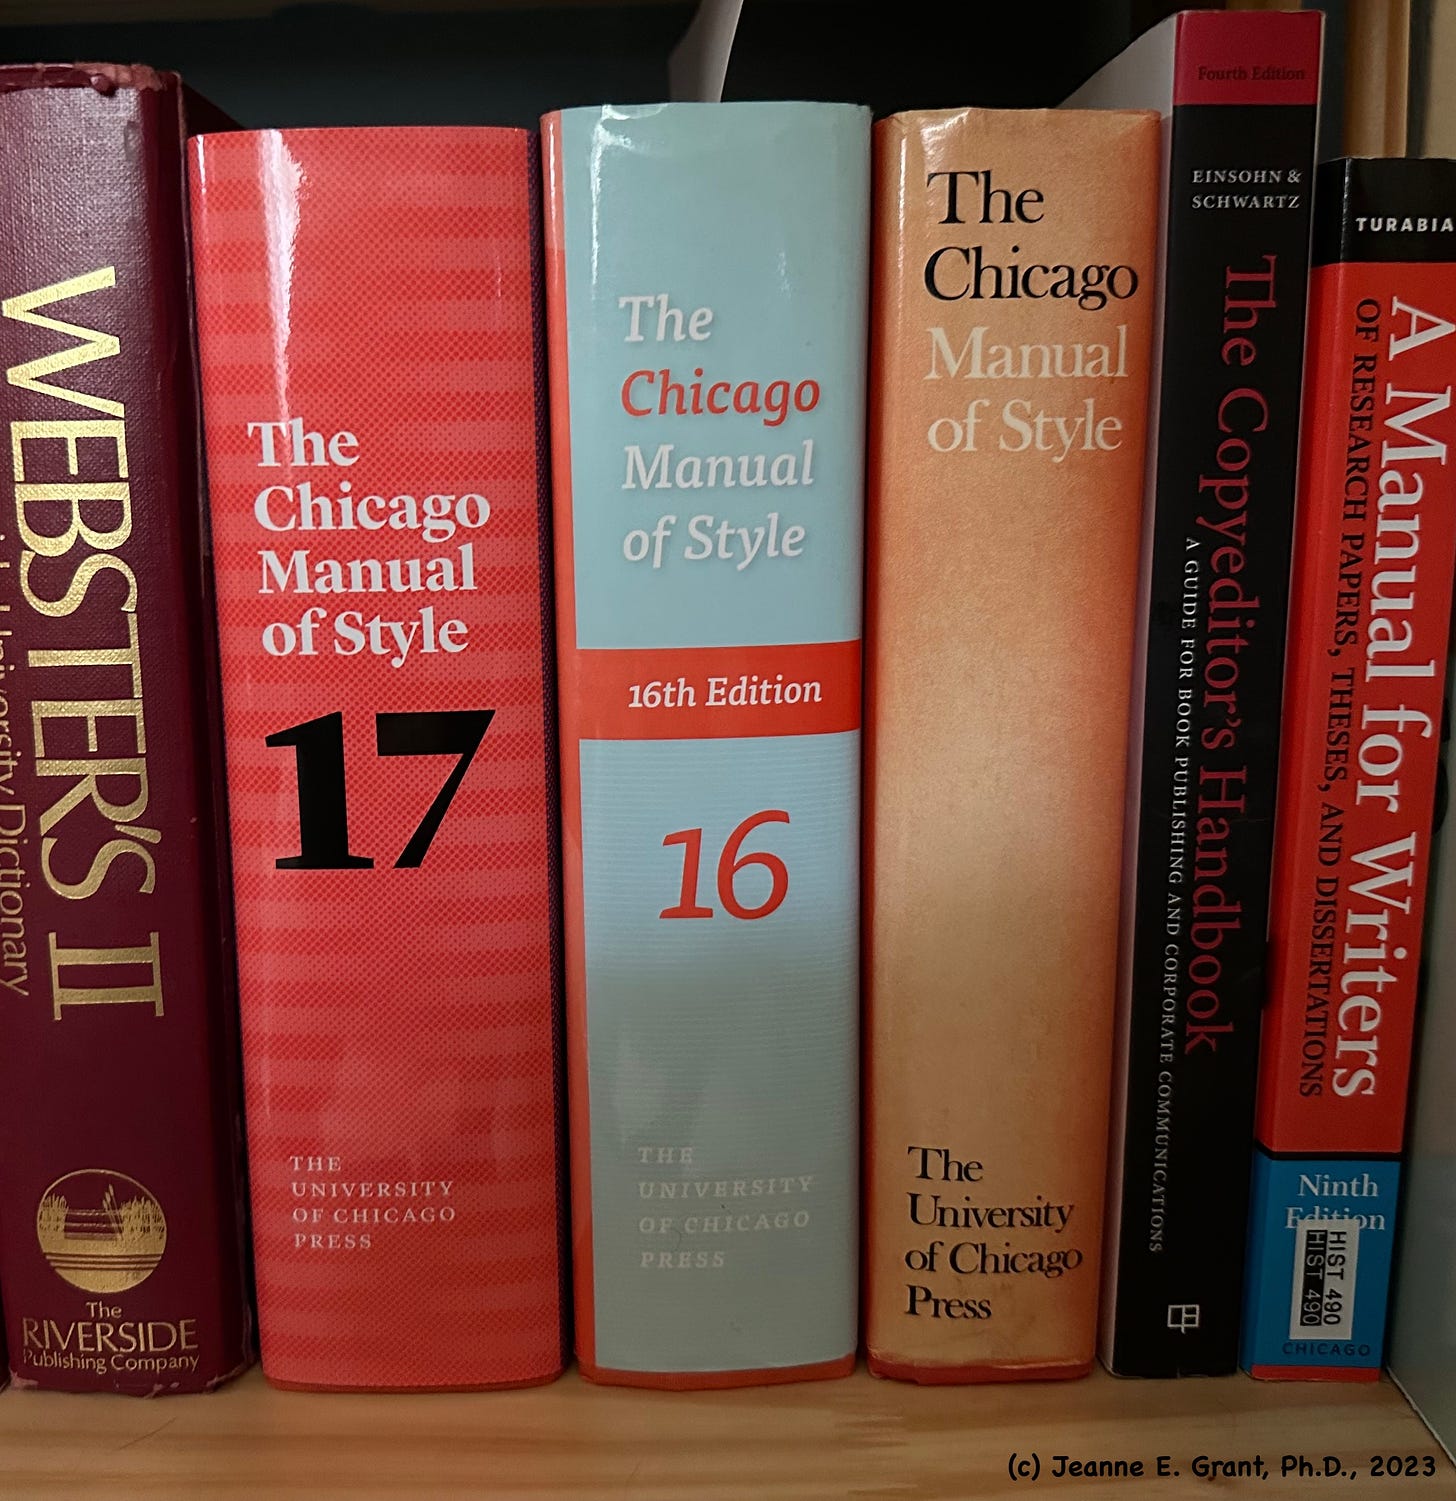 The five reference books mentioned in the post stand next to each other.